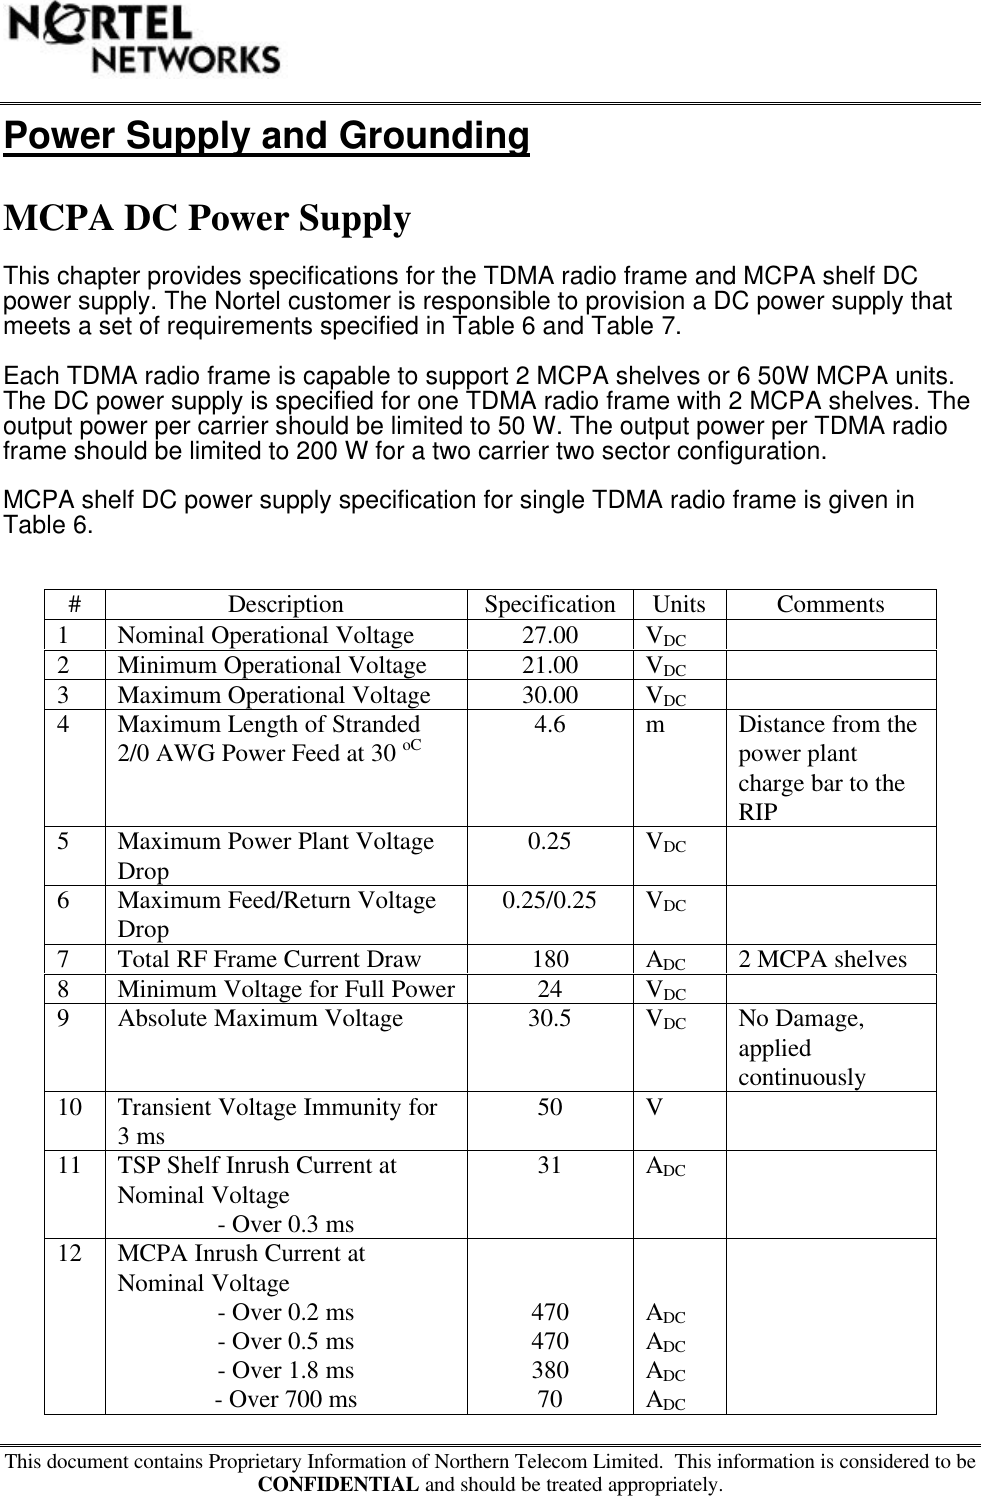 This document contains Proprietary Information of Northern Telecom Limited.  This information is considered to beCONFIDENTIAL and should be treated appropriately.Power Supply and GroundingMCPA DC Power SupplyThis chapter provides specifications for the TDMA radio frame and MCPA shelf DCpower supply. The Nortel customer is responsible to provision a DC power supply thatmeets a set of requirements specified in Table 6 and Table 7.Each TDMA radio frame is capable to support 2 MCPA shelves or 6 50W MCPA units.The DC power supply is specified for one TDMA radio frame with 2 MCPA shelves. Theoutput power per carrier should be limited to 50 W. The output power per TDMA radioframe should be limited to 200 W for a two carrier two sector configuration.MCPA shelf DC power supply specification for single TDMA radio frame is given inTable 6.#Description Specification Units Comments1Nominal Operational Voltage 27.00 VDC2Minimum Operational Voltage 21.00 VDC3Maximum Operational Voltage 30.00 VDC4Maximum Length of Stranded2/0 AWG Power Feed at 30 oC 4.6 mDistance from thepower plantcharge bar to theRIP5Maximum Power Plant VoltageDrop 0.25 VDC6Maximum Feed/Return VoltageDrop 0.25/0.25 VDC7Total RF Frame Current Draw 180 ADC 2 MCPA shelves8Minimum Voltage for Full Power 24 VDC9Absolute Maximum Voltage 30.5 VDC No Damage,appliedcontinuously10 Transient Voltage Immunity for3 ms 50 V11 TSP Shelf Inrush Current atNominal Voltage- Over 0.3 ms31 ADC12 MCPA Inrush Current atNominal Voltage- Over 0.2 ms- Over 0.5 ms- Over 1.8 ms- Over 700 ms47047038070ADCADCADCADC